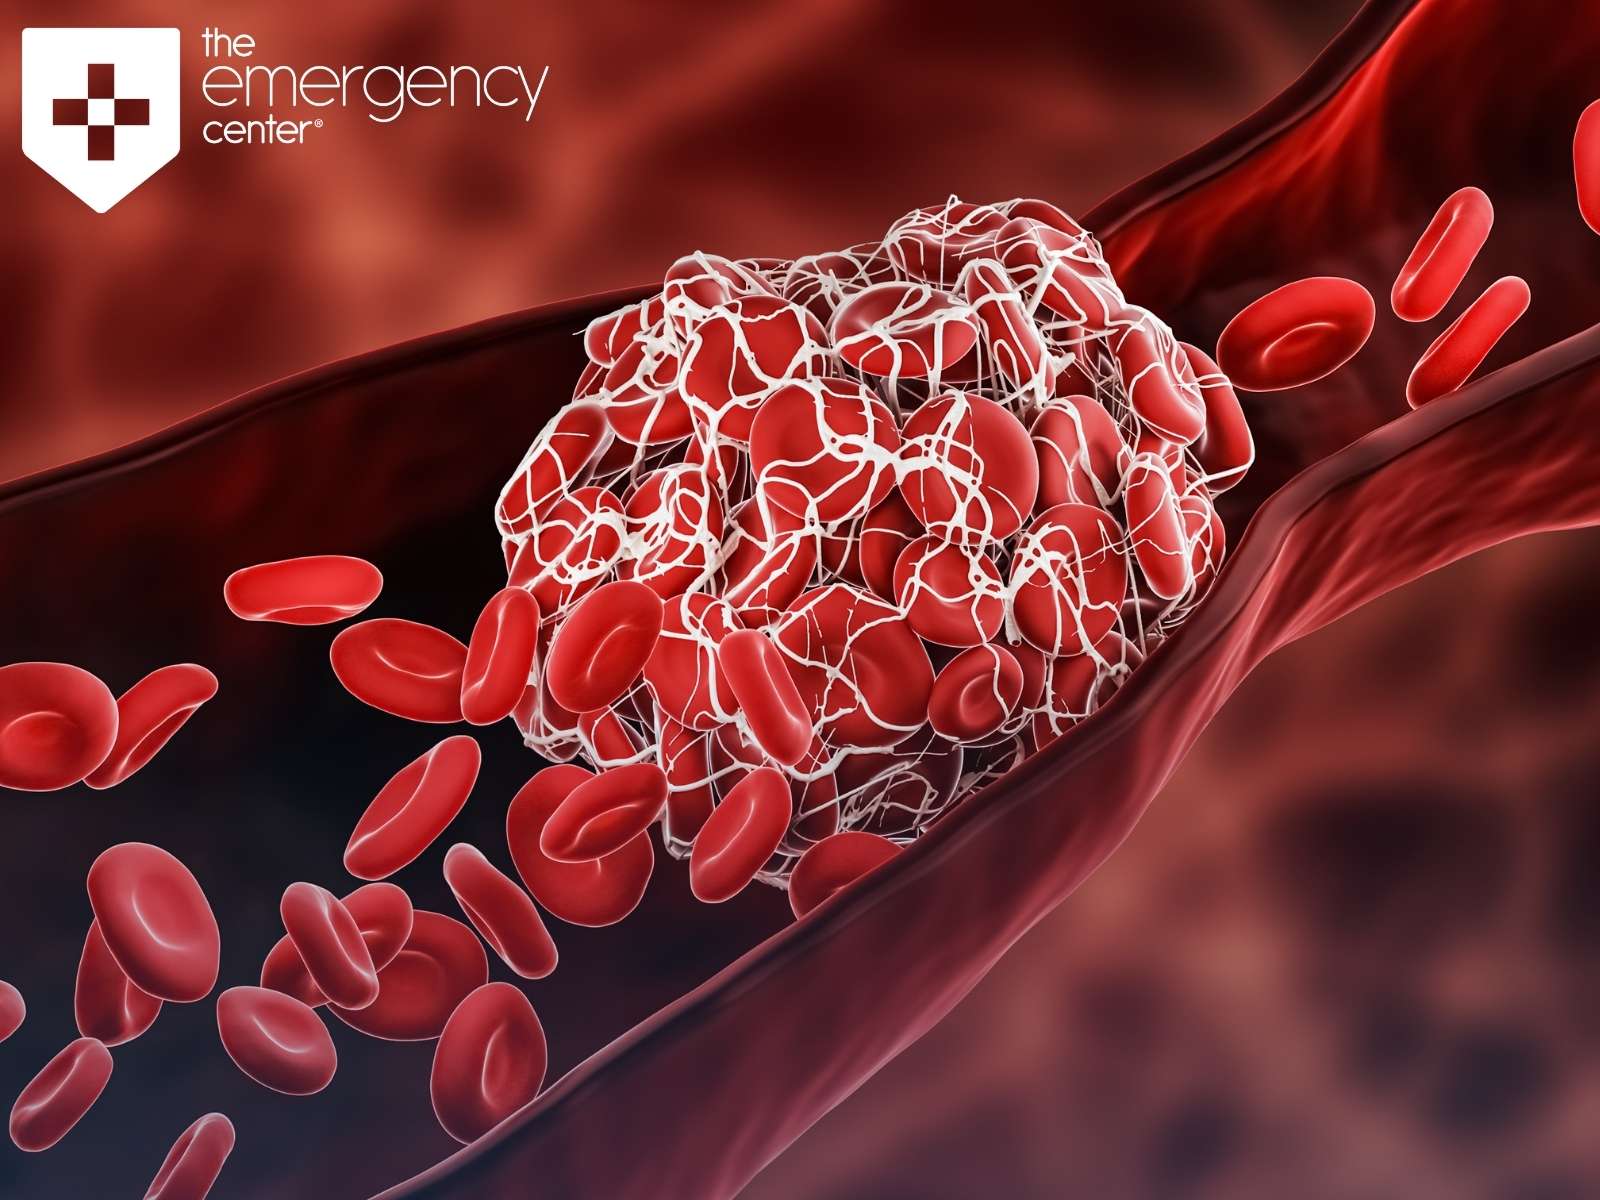 When a Blood Clot Becomes An Emergency